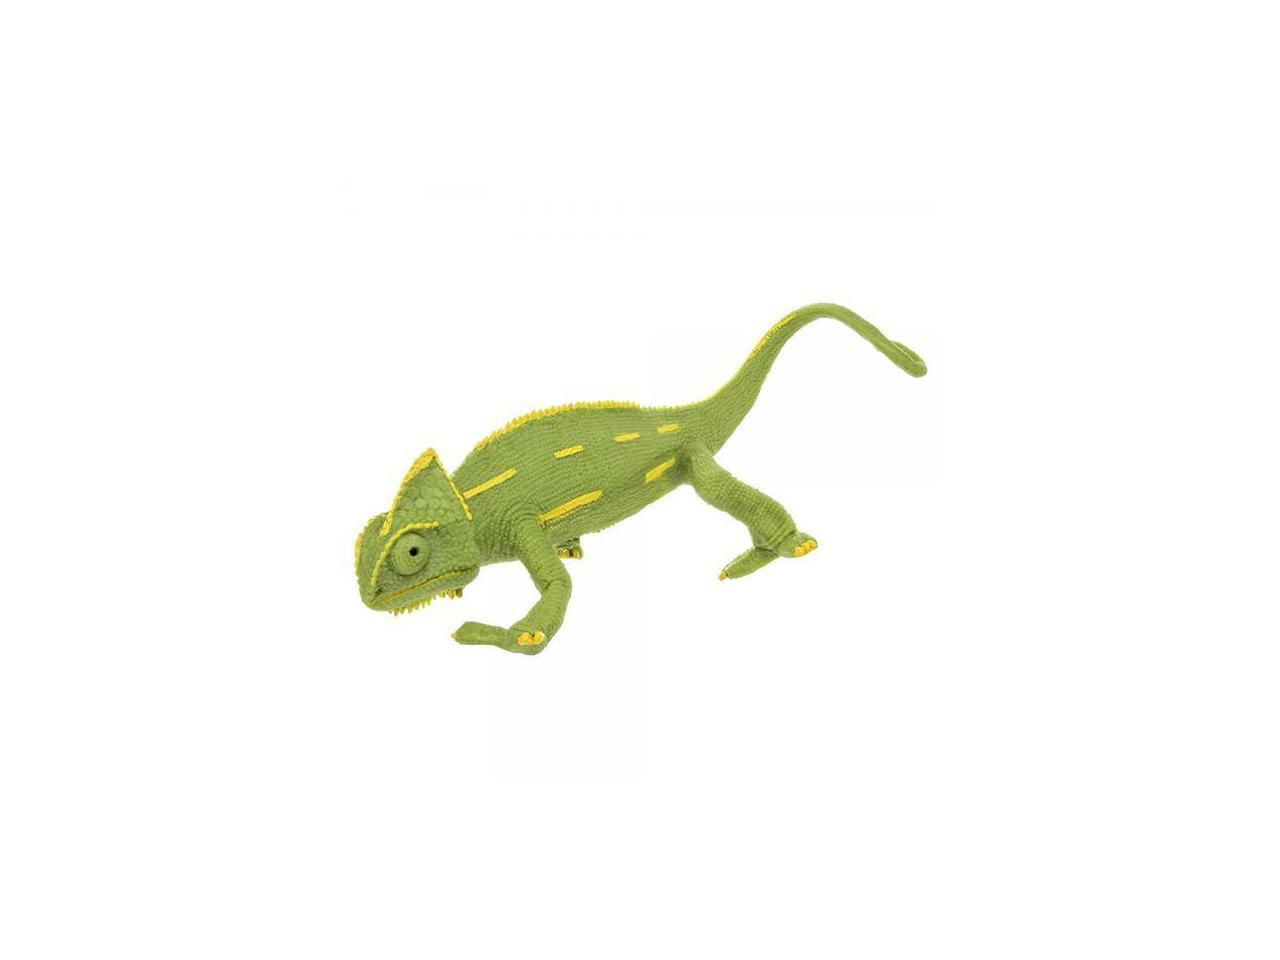 Safari Ltd Incredible Creatures Veiled Chameleon Baby Hand-Painted Toy  Figurine For Ages 3 And Up 